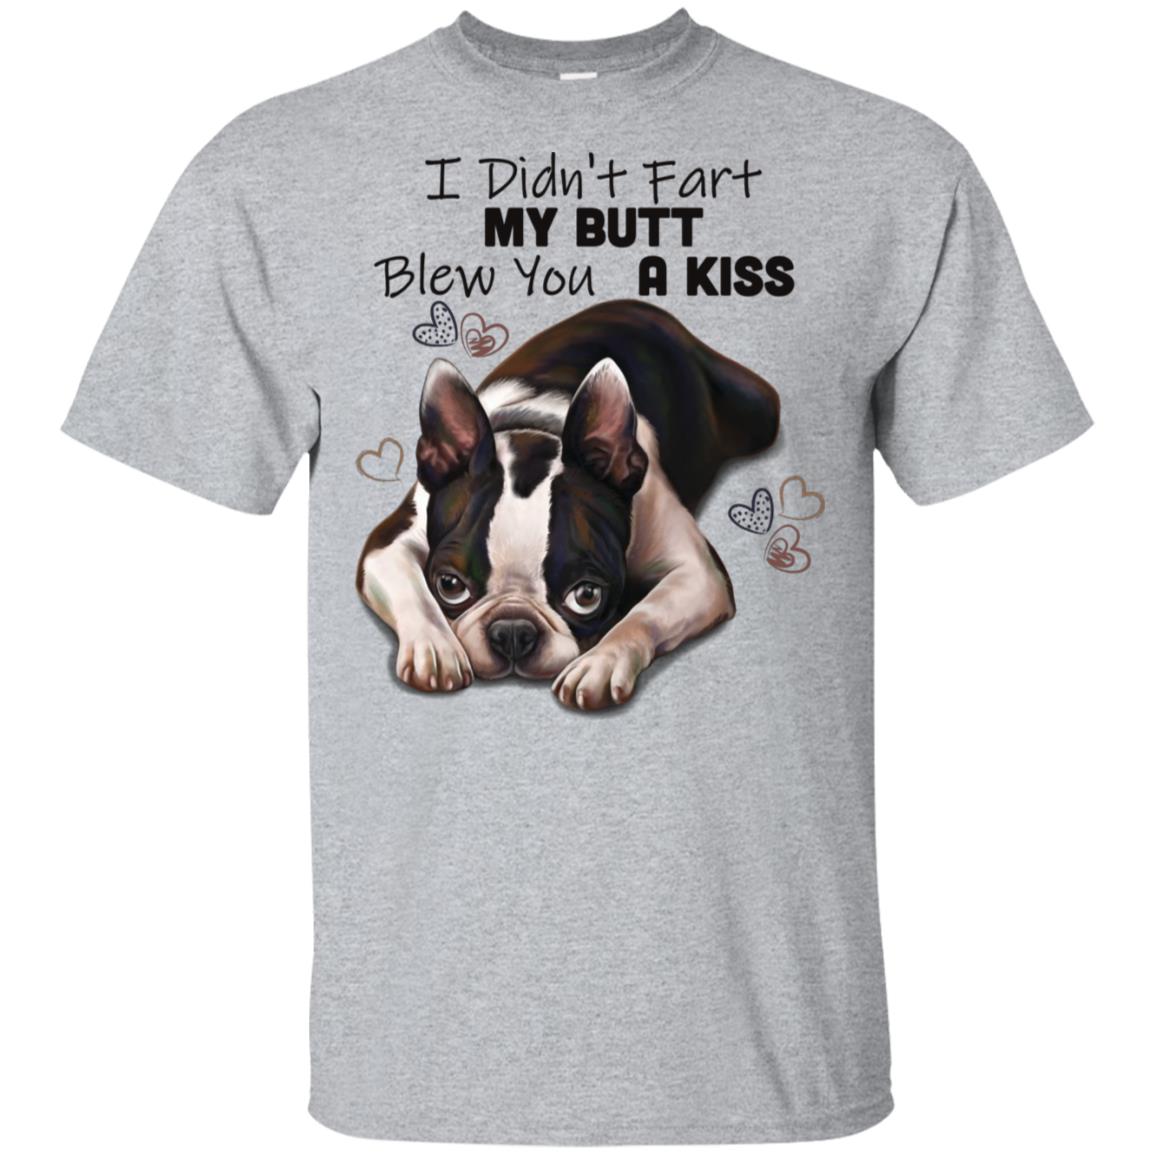 Boston Terrier T-Shirt, I Didn't Fart My Butt Blew You A Kiss, Funny shirt, Boston Terrier gift - GoneBold.gift